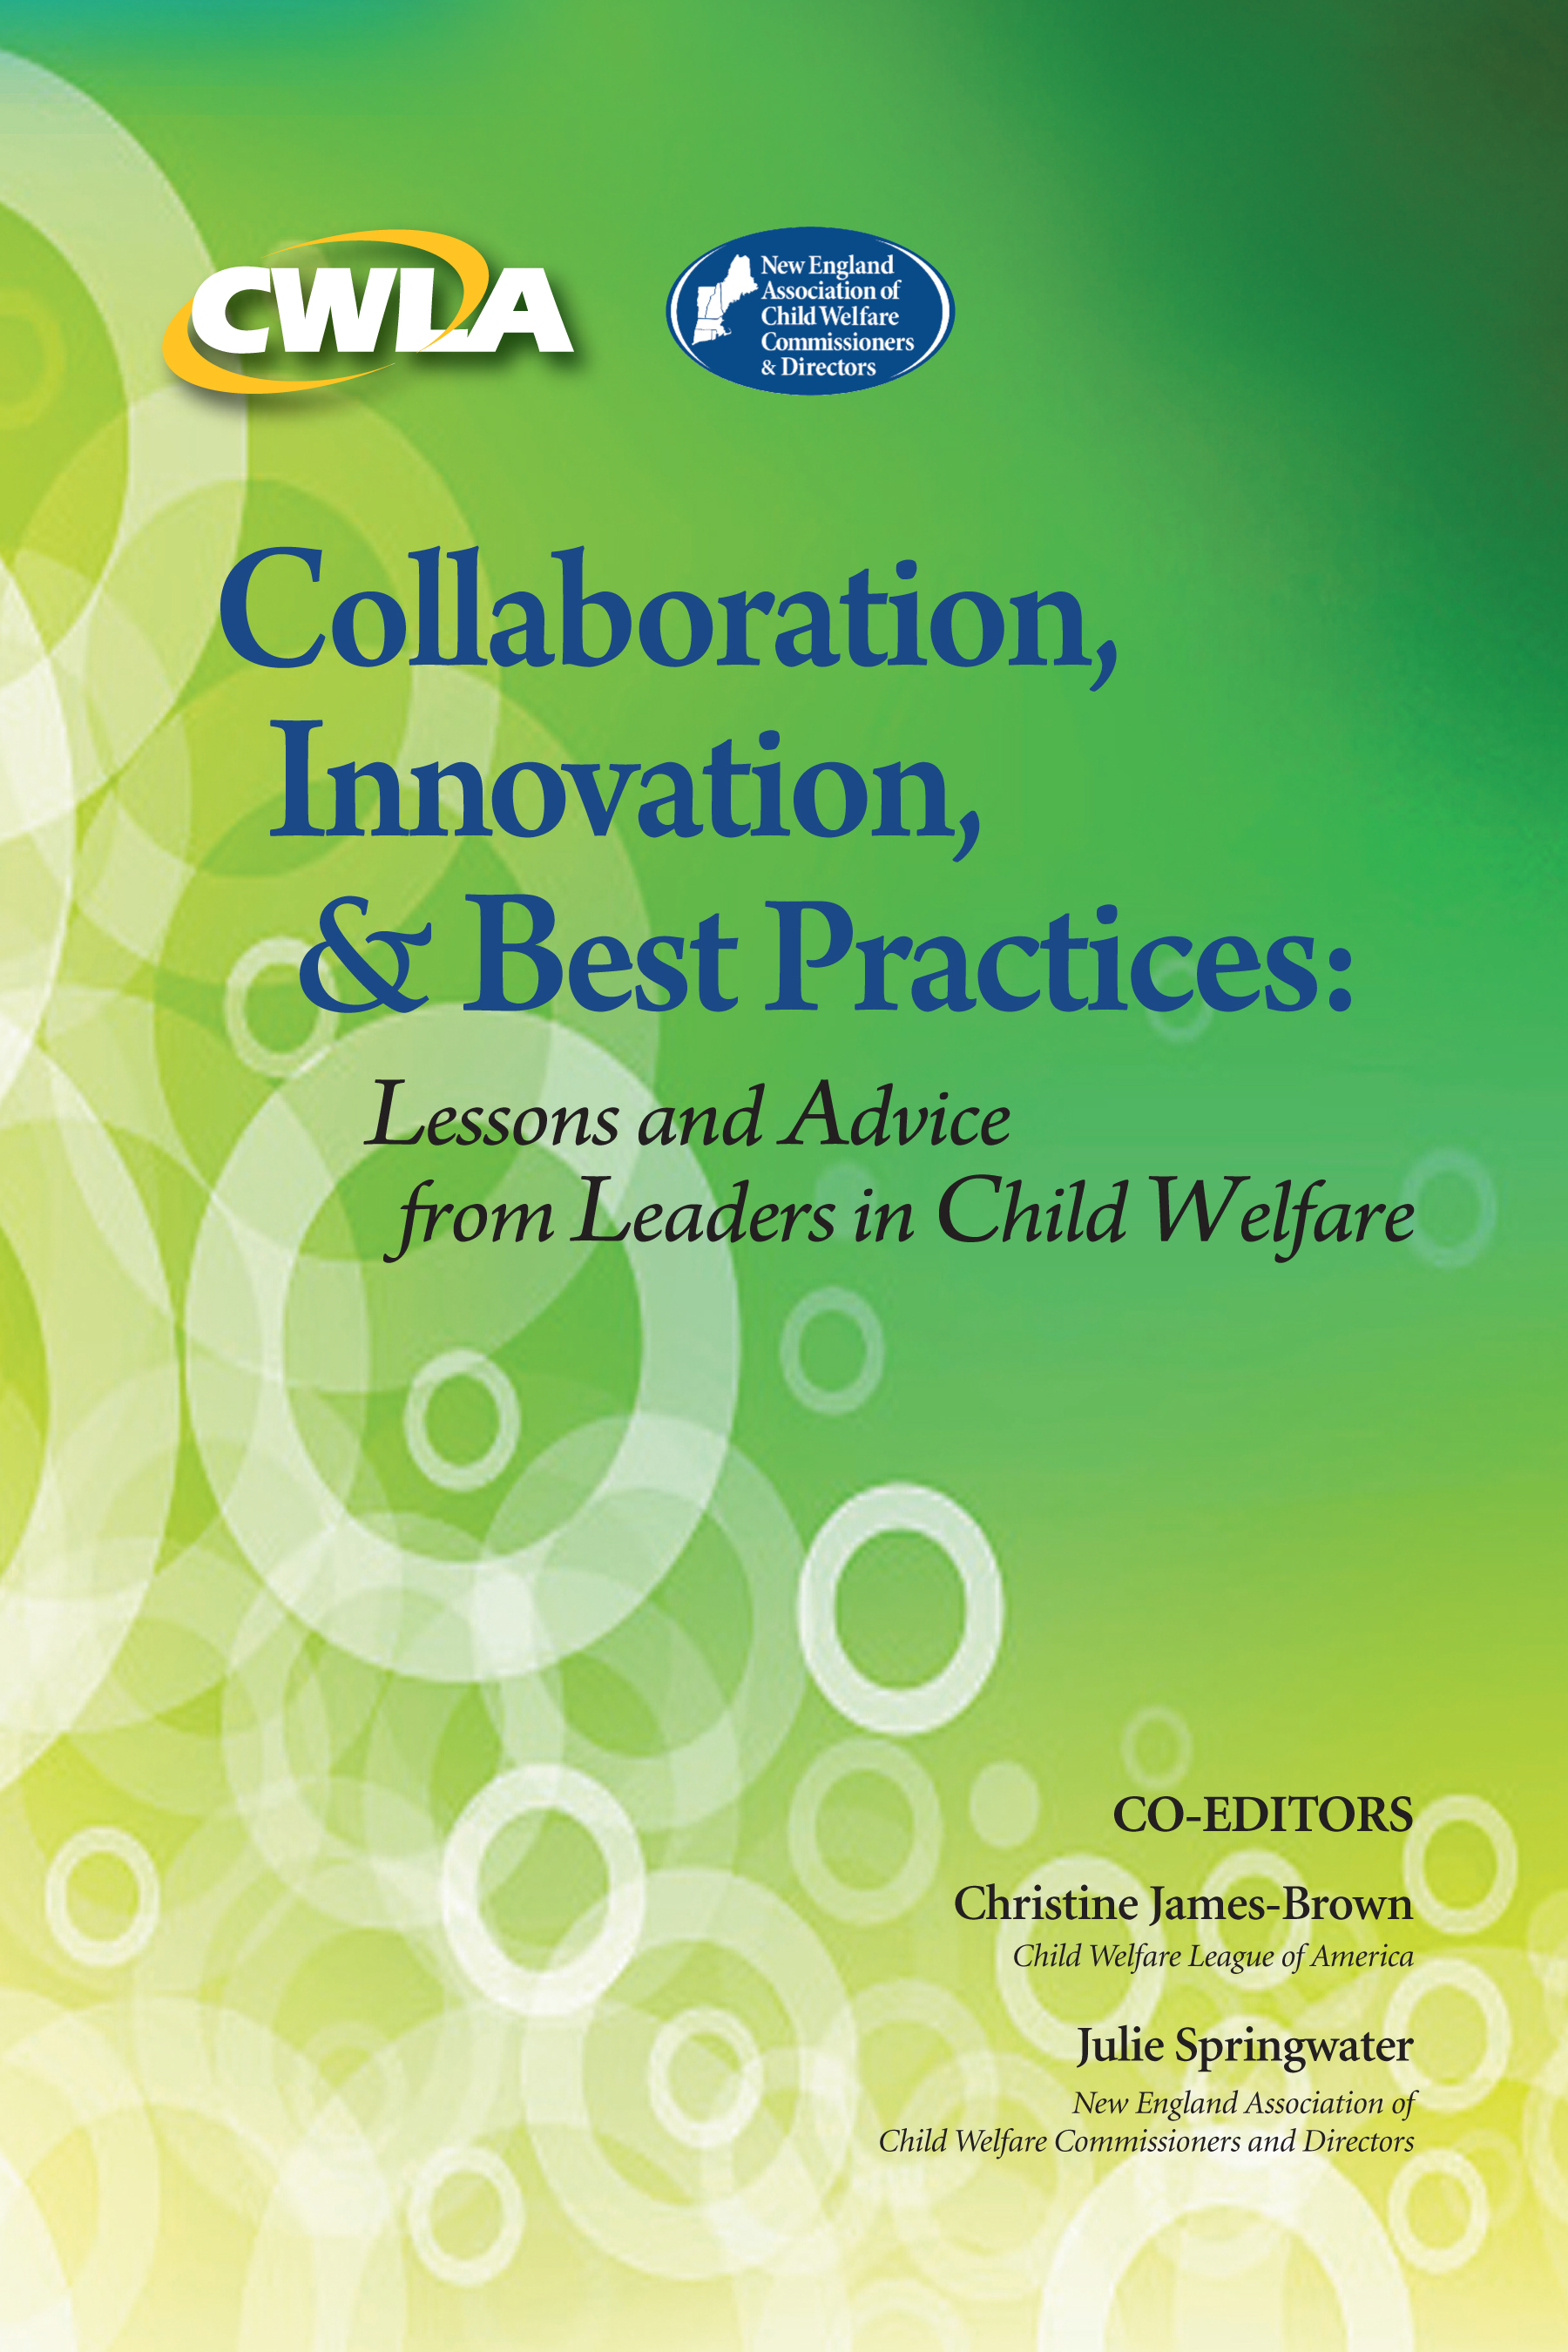 Collaboration, Innovation, & Best Practices: Lessons and Advice from Leaders in Child Welfare (PDF)